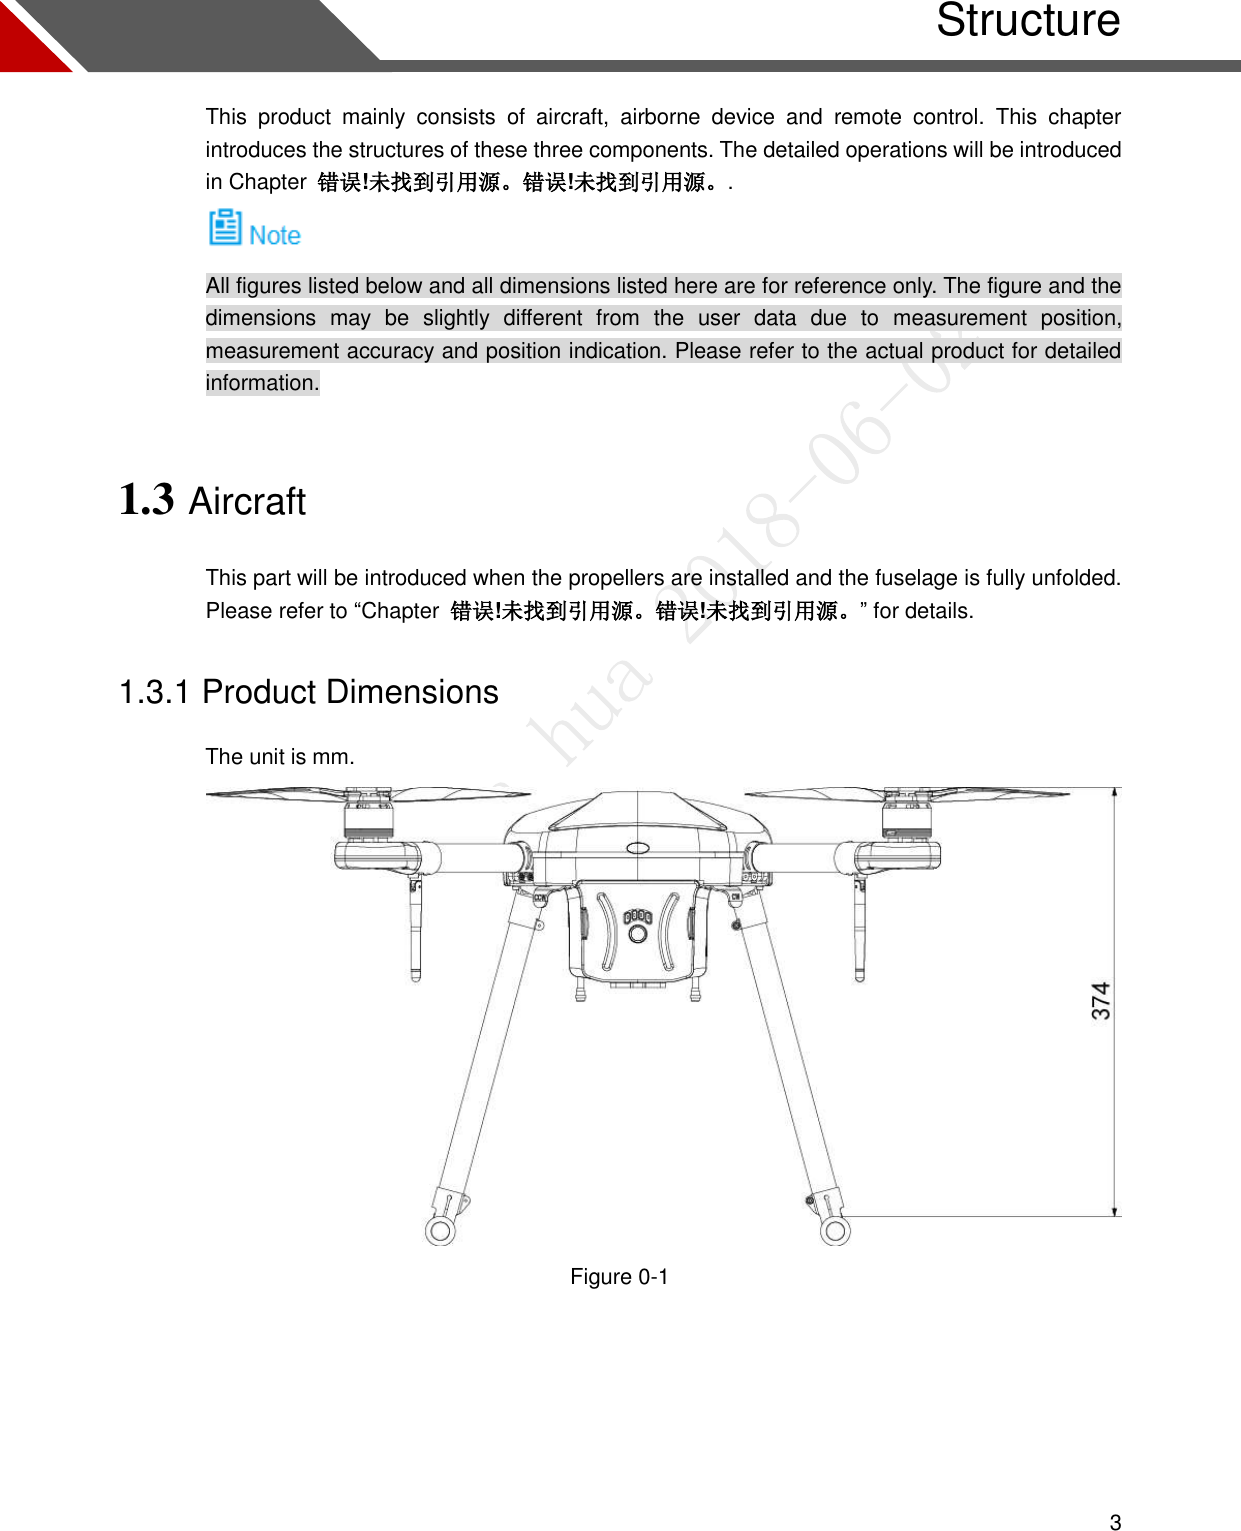  3   Structure This  product  mainly  consists  of  aircraft,  airborne  device  and  remote  control.  This  chapter introduces the structures of these three components. The detailed operations will be introduced in Chapter  错误!未找到引用源。错误!未找到引用源。.  All figures listed below and all dimensions listed here are for reference only. The figure and the dimensions  may  be  slightly  different  from  the  user  data  due  to  measurement  position, measurement accuracy and position indication. Please refer to the actual product for detailed information. 1.3 Aircraft This part will be introduced when the propellers are installed and the fuselage is fully unfolded. Please refer to “Chapter  错误!未找到引用源。错误!未找到引用源。” for details. 1.3.1 Product Dimensions                 The unit is mm.  Figure 0-1  